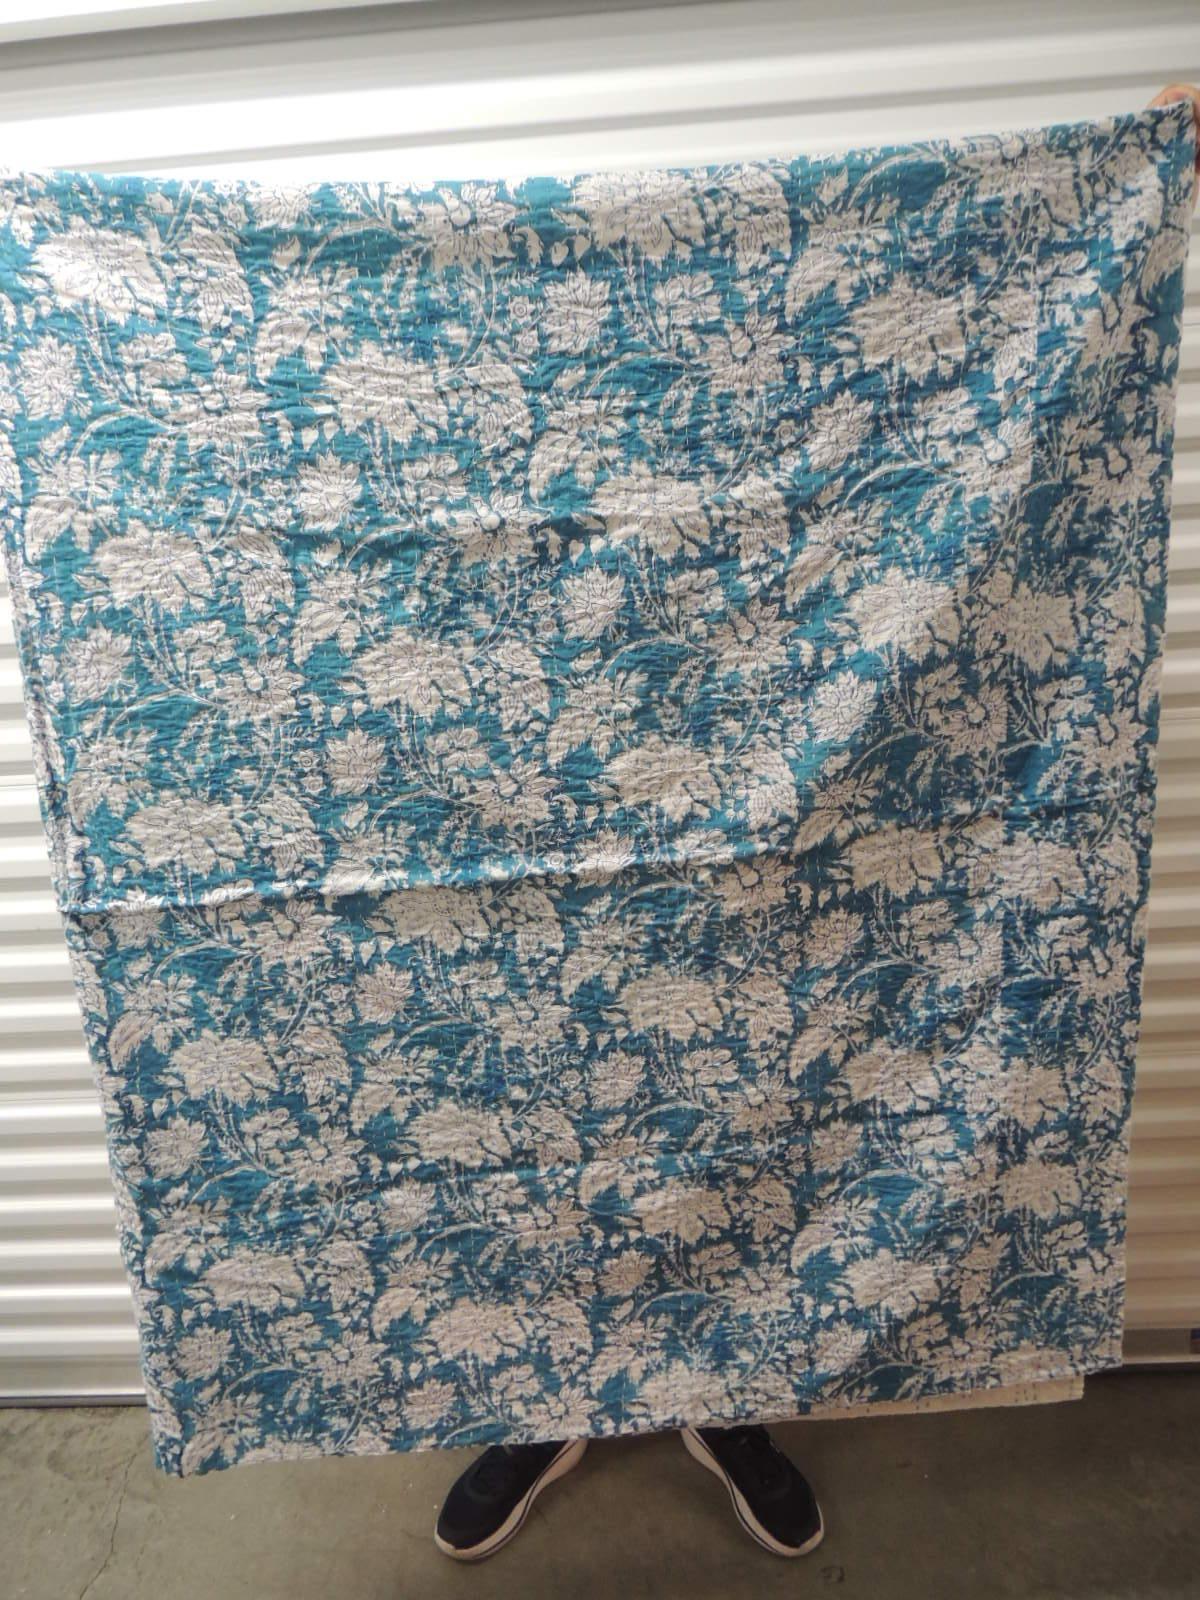 Bohemian Blue and White Quilted Blanket